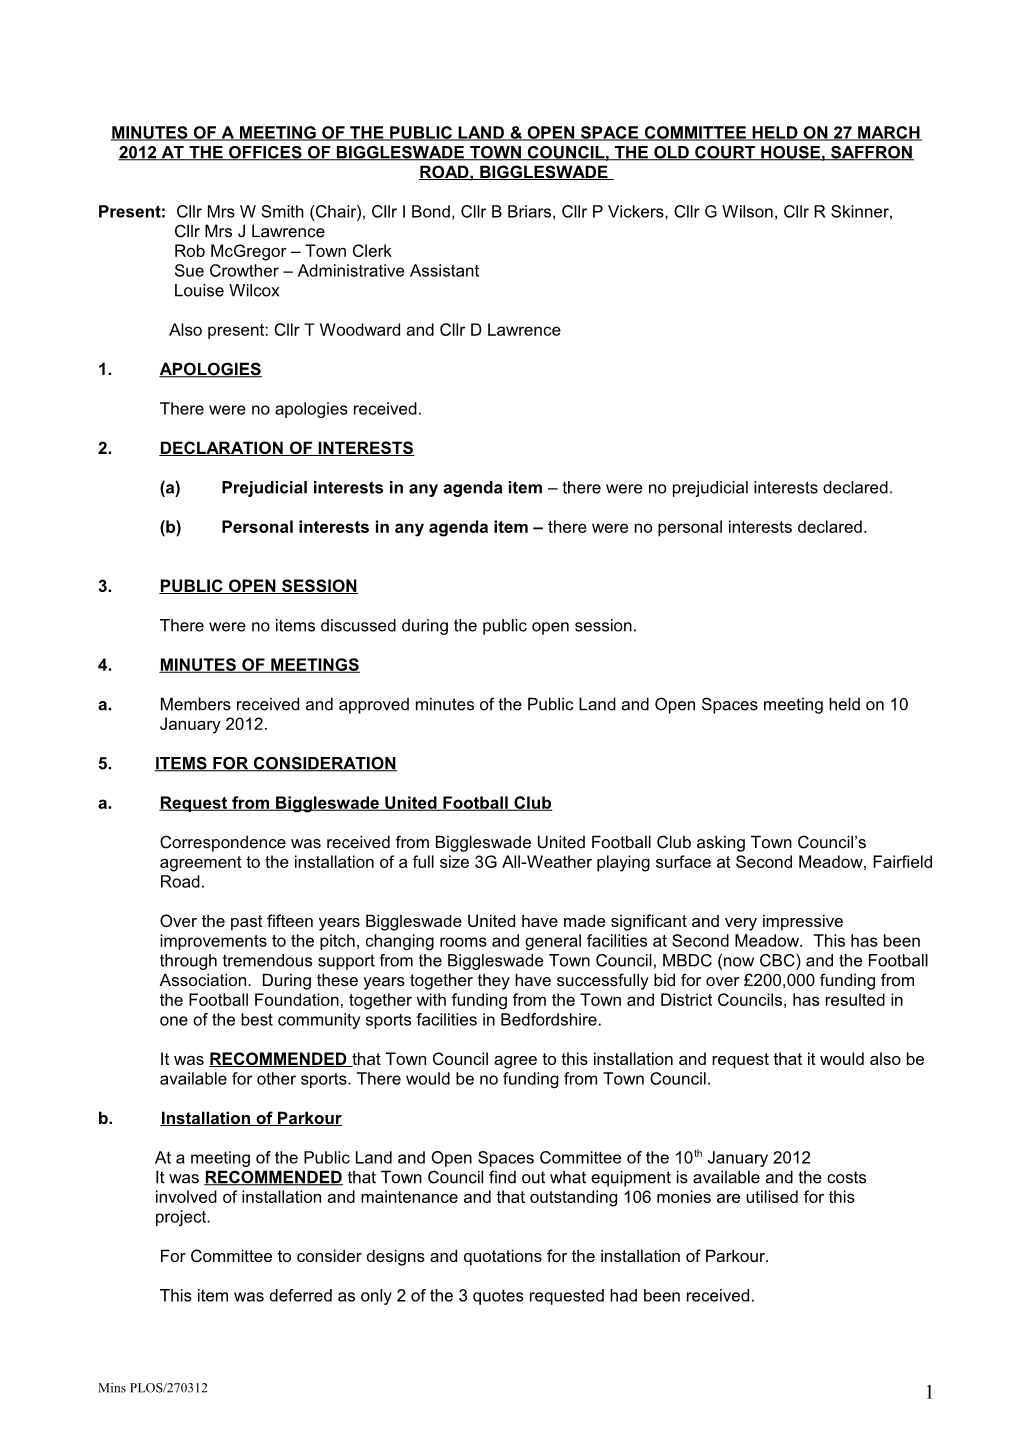 MINUTES of a MEETING of the PLANNING COMMITTEE HELD on TUESDAY 13Th FEBRUARY 2007 at THE